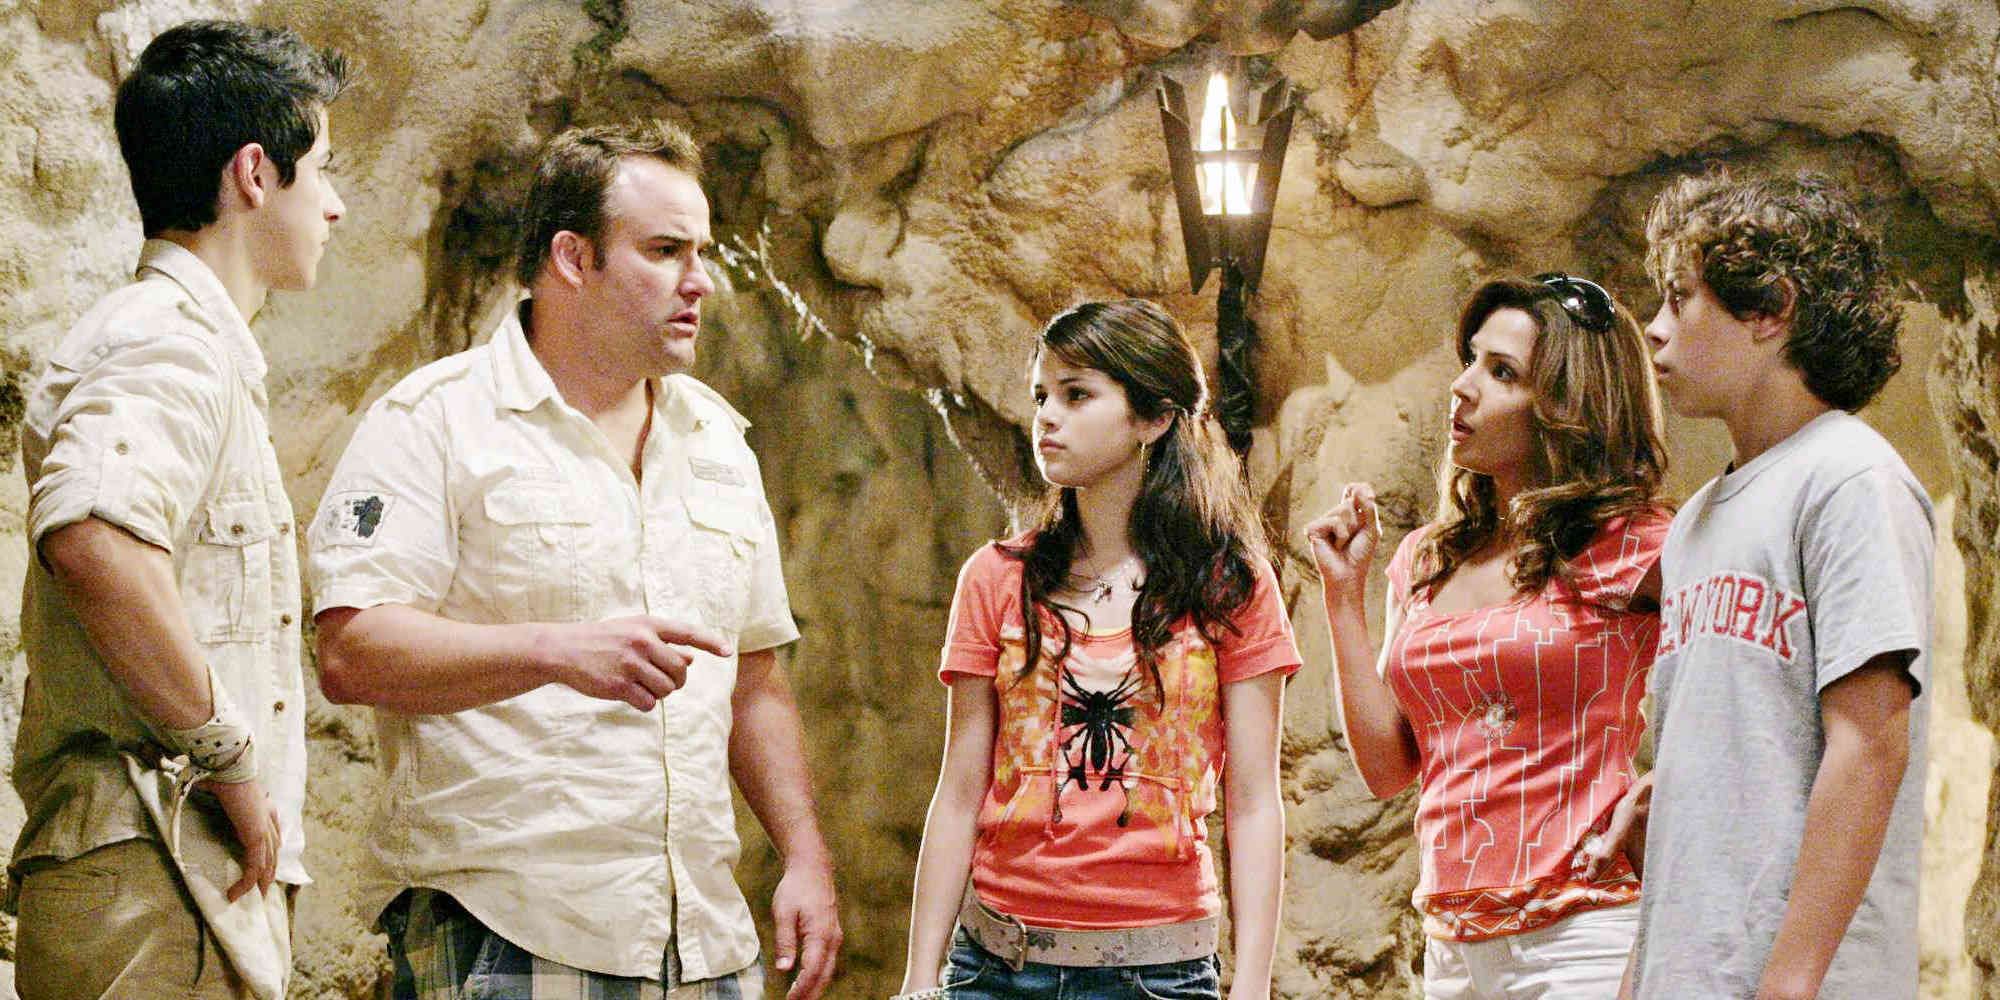 Wizards Of Waverly Place 5 Things That Changed After The Pilot (& 5 That Stayed The Same)